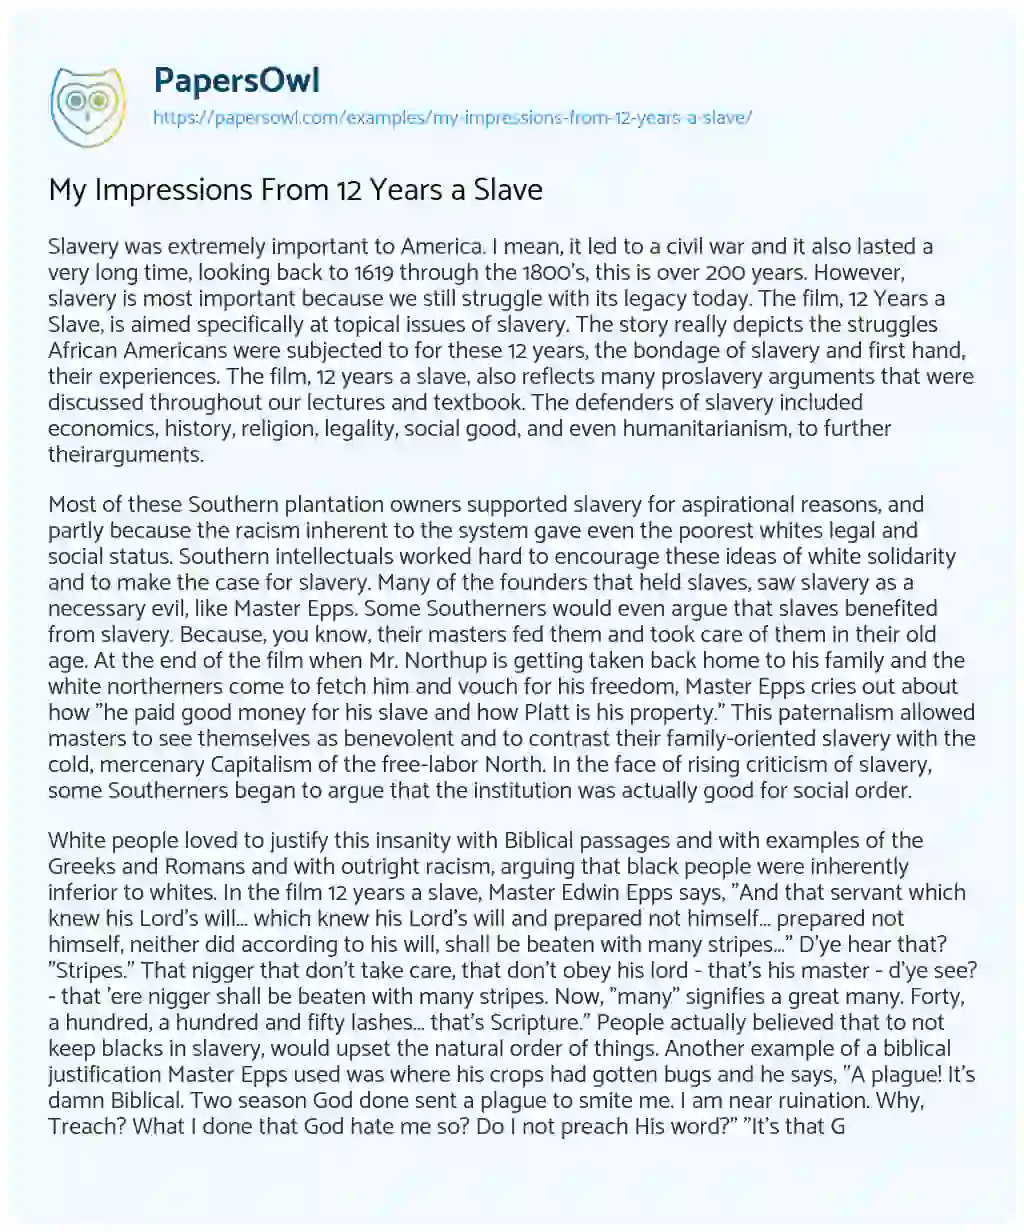 Essay on My Impressions from 12 Years a Slave